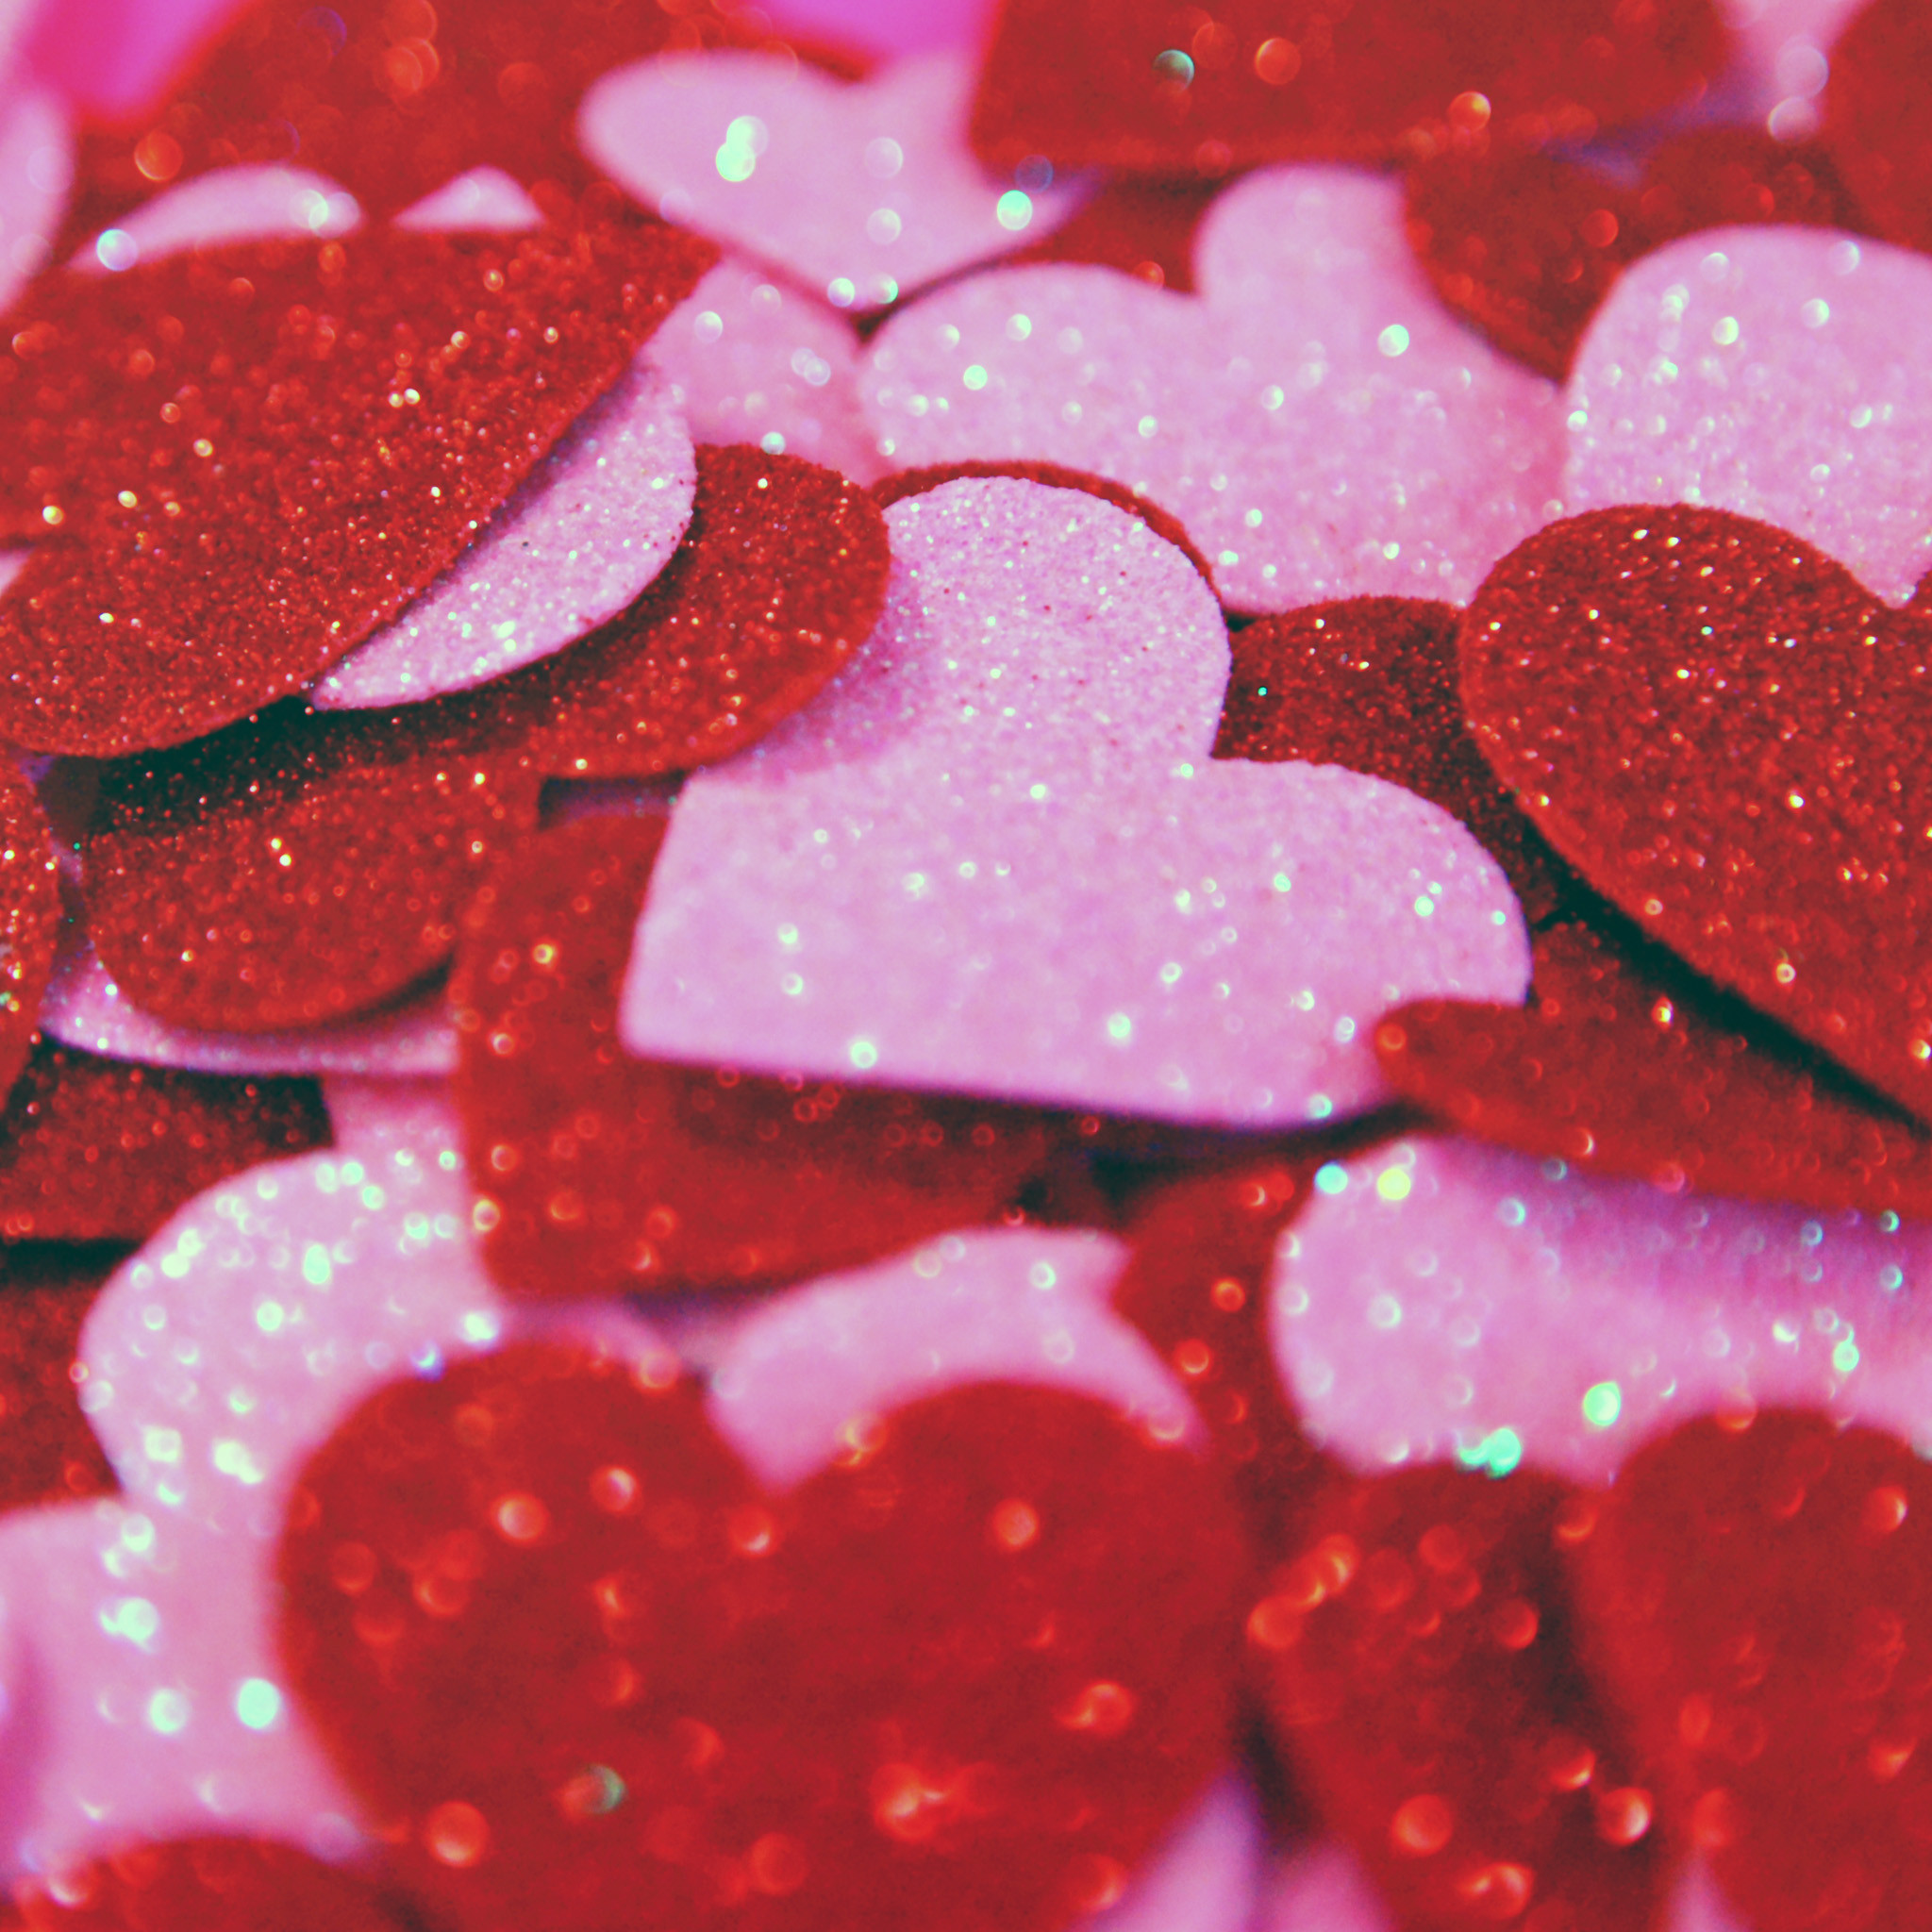 Purple Sherbet Photography - Pink And Red Hearts - HD Wallpaper 